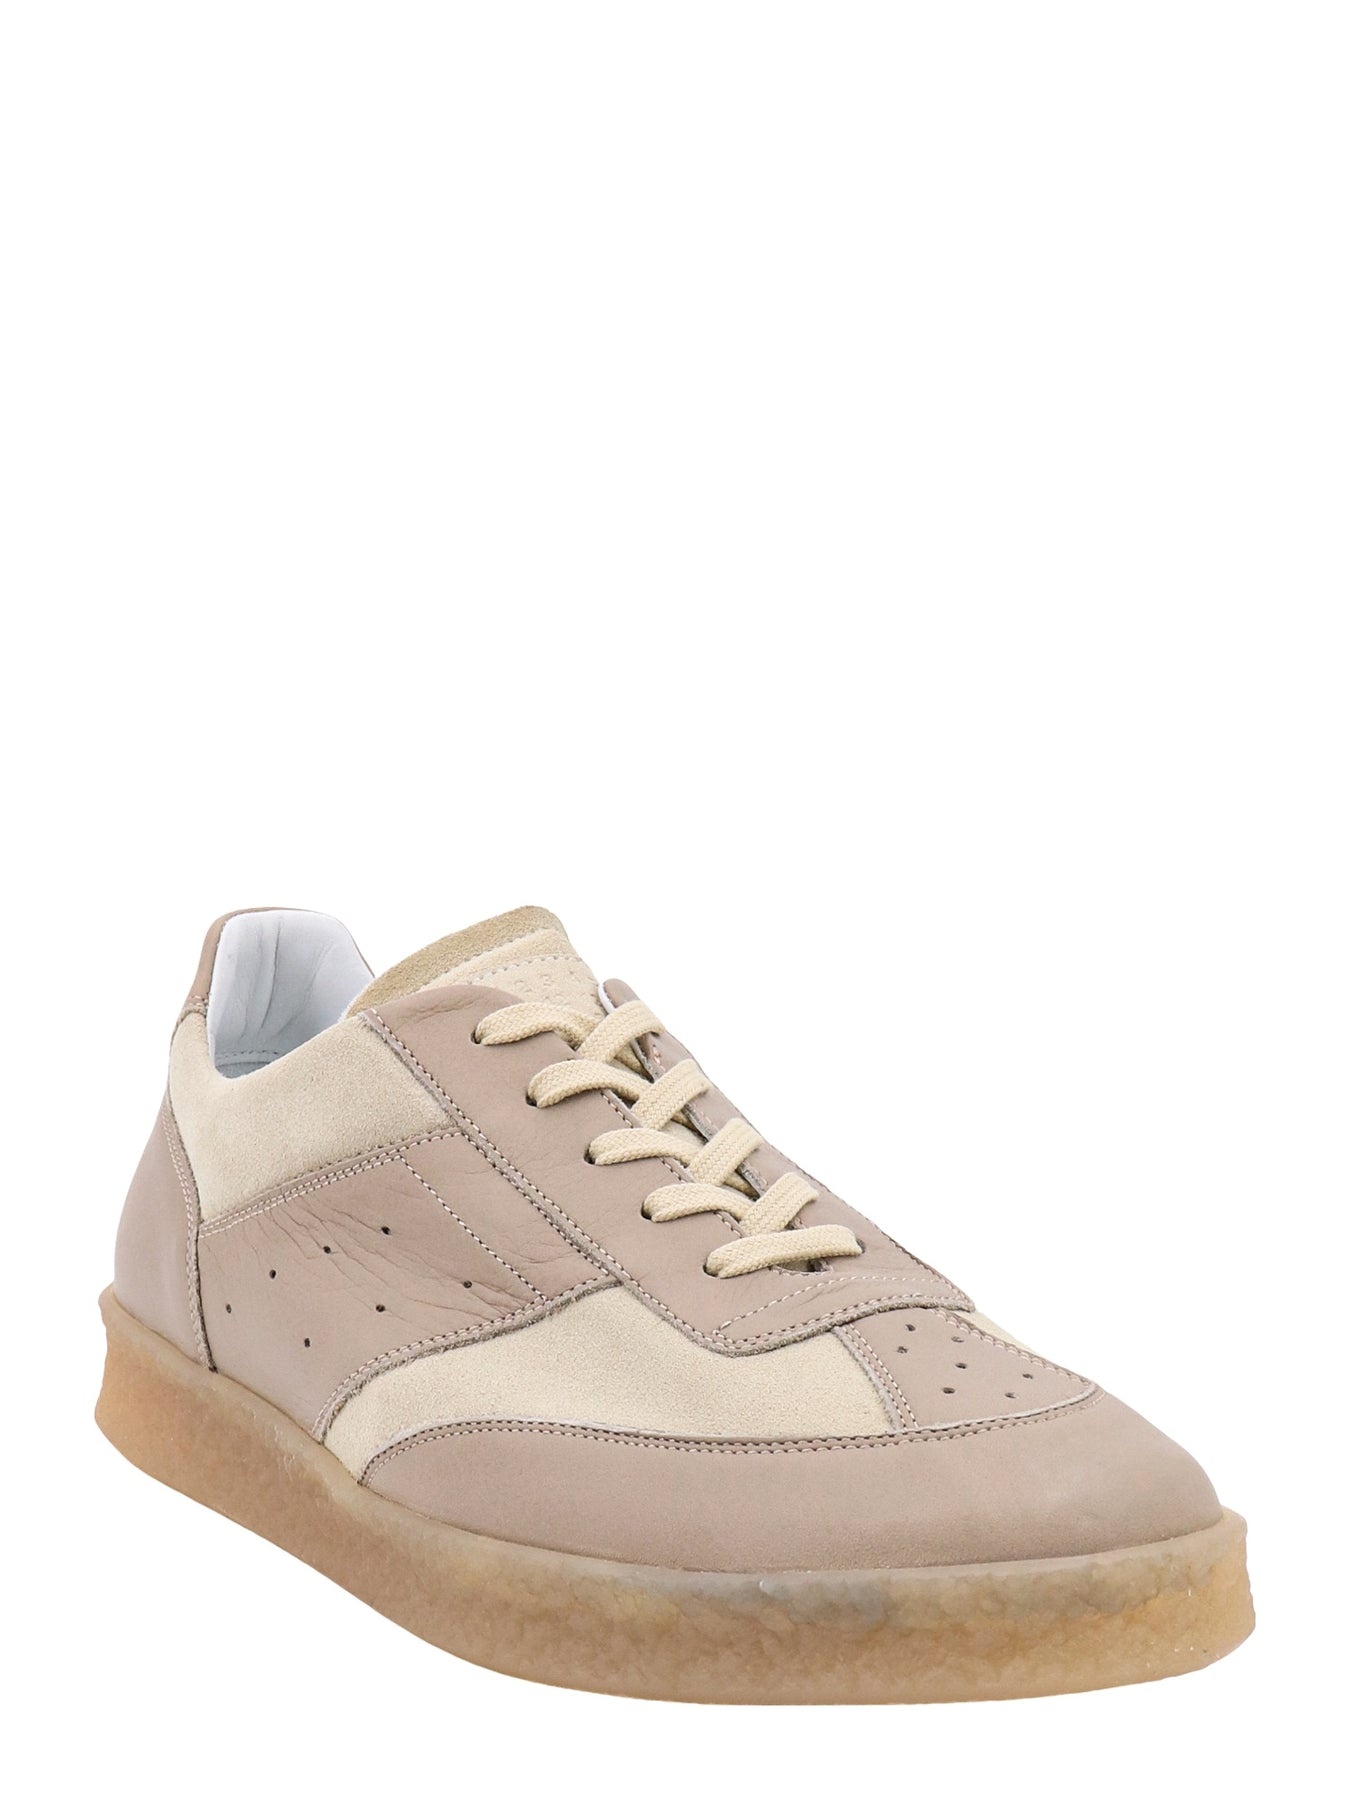 Leather sneakers with suede inserts - 2